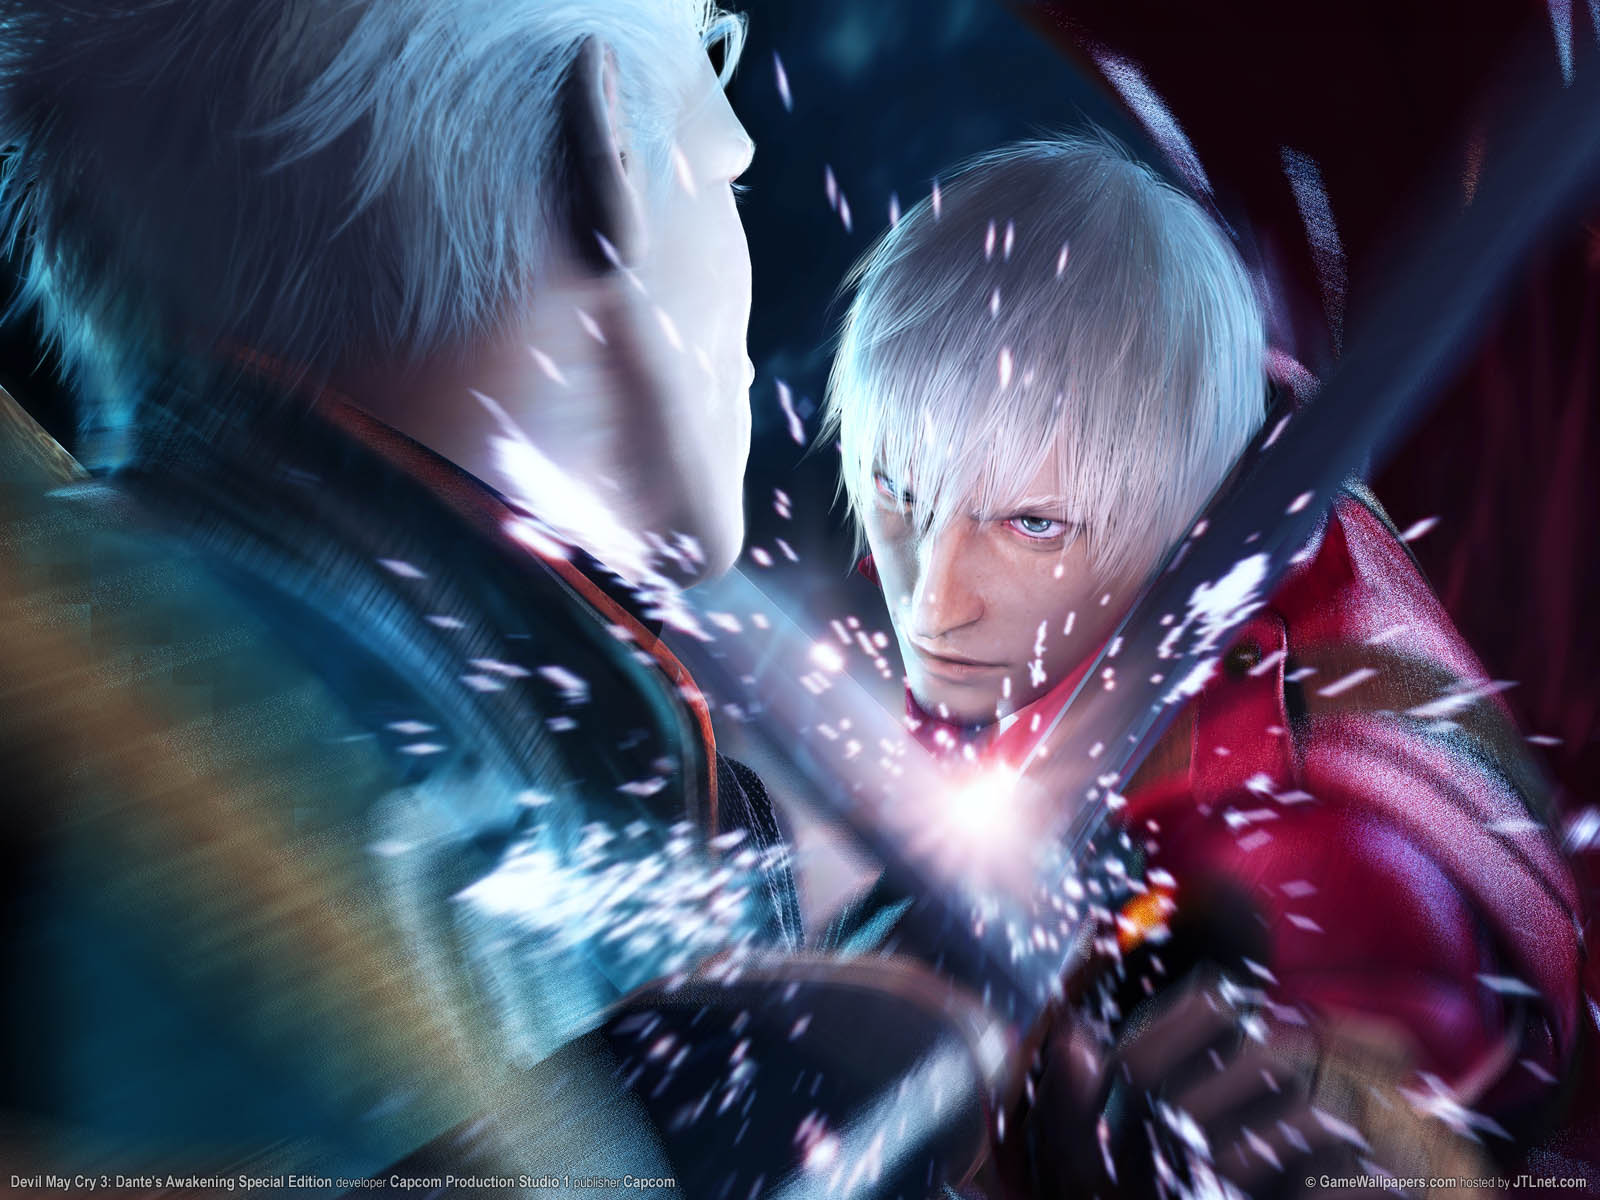 devil may cry hd collection, devil may cry